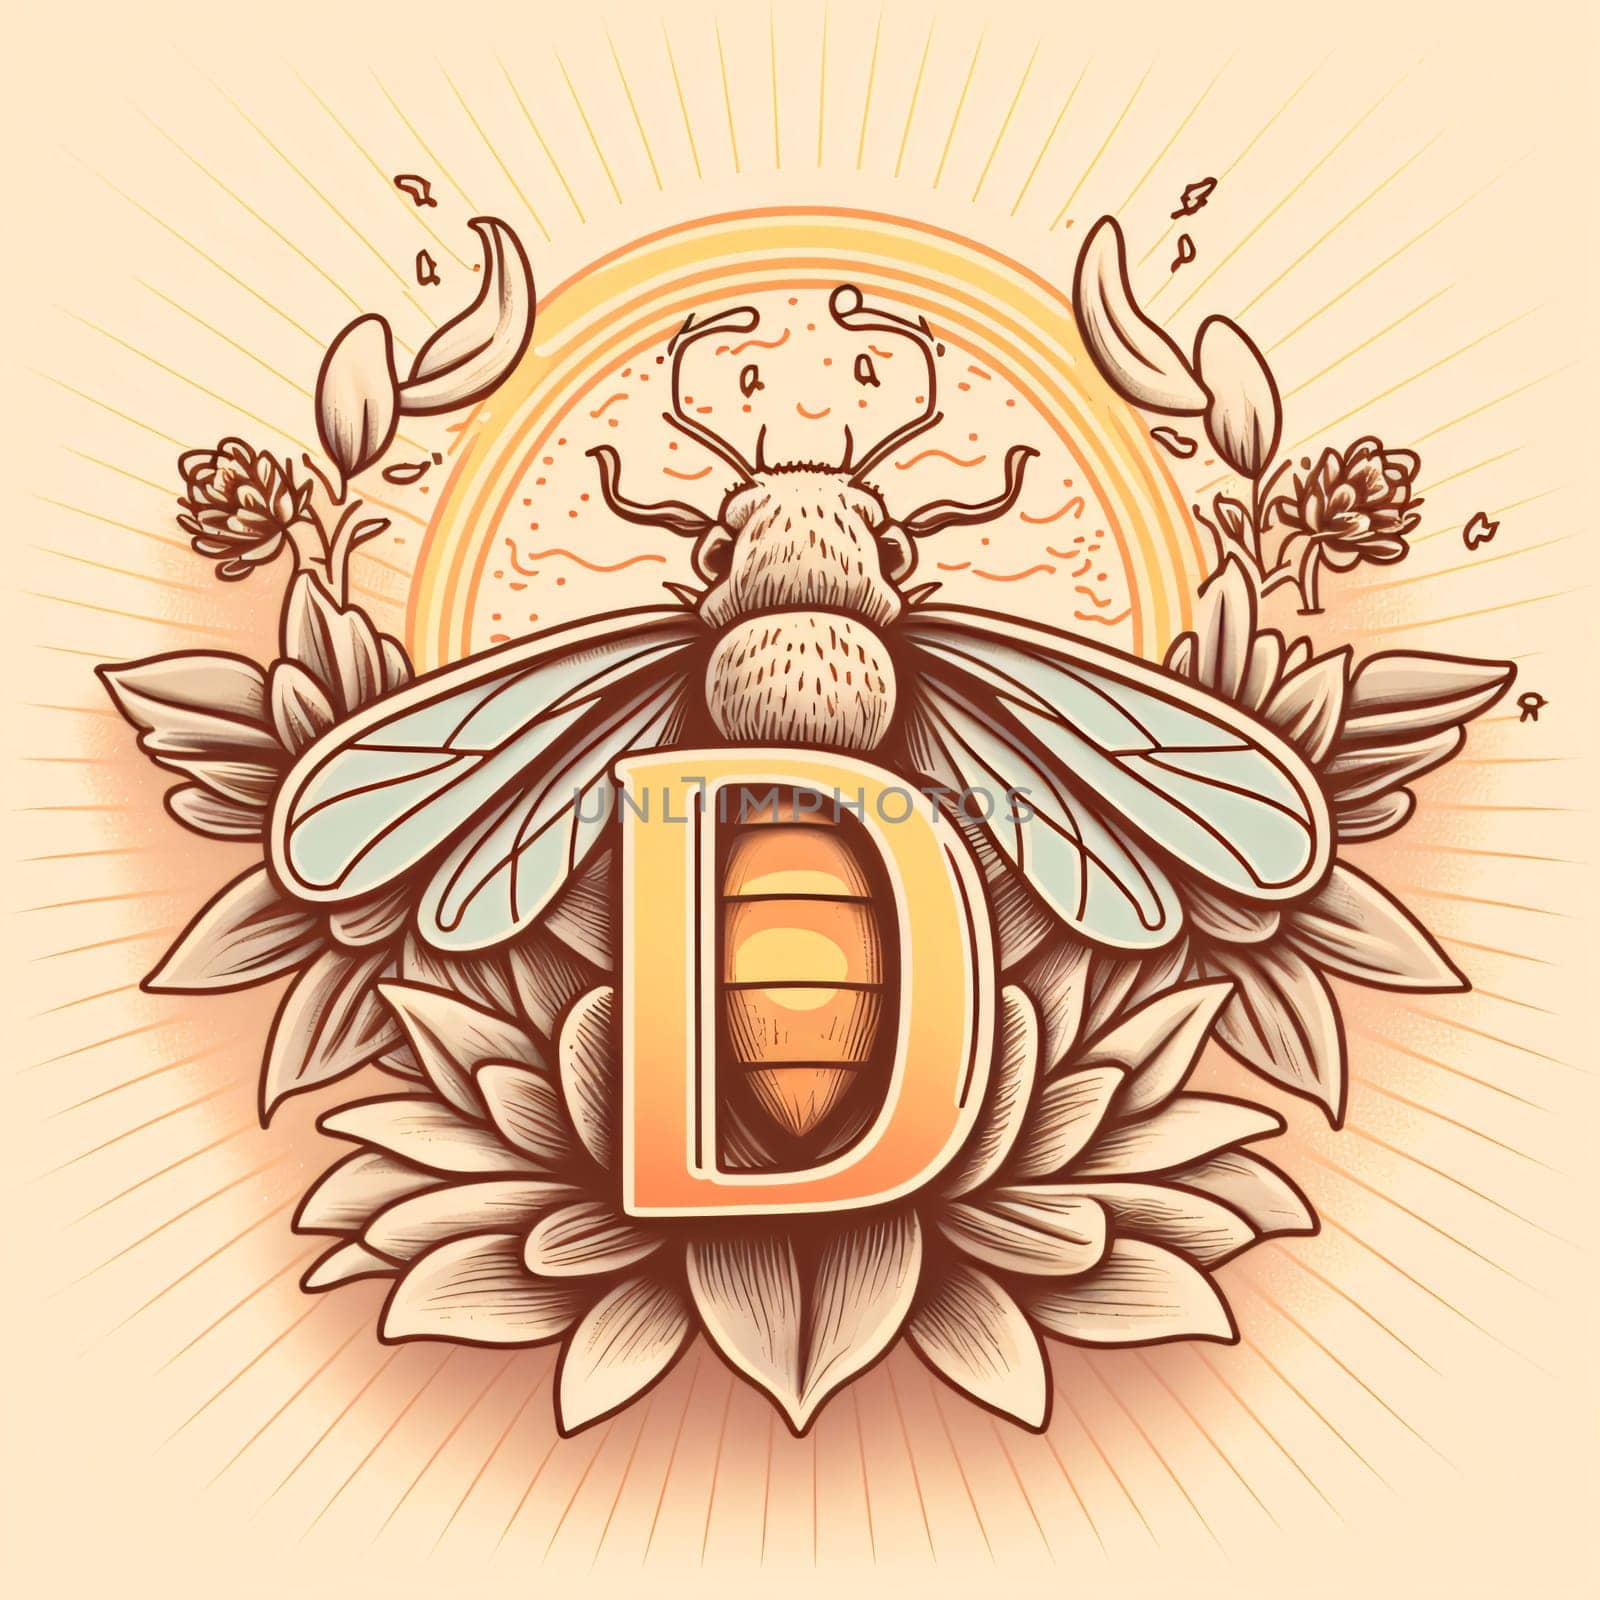 Graphic alphabet letters: Bee with letter D. Vector illustration in vintage engraving style.